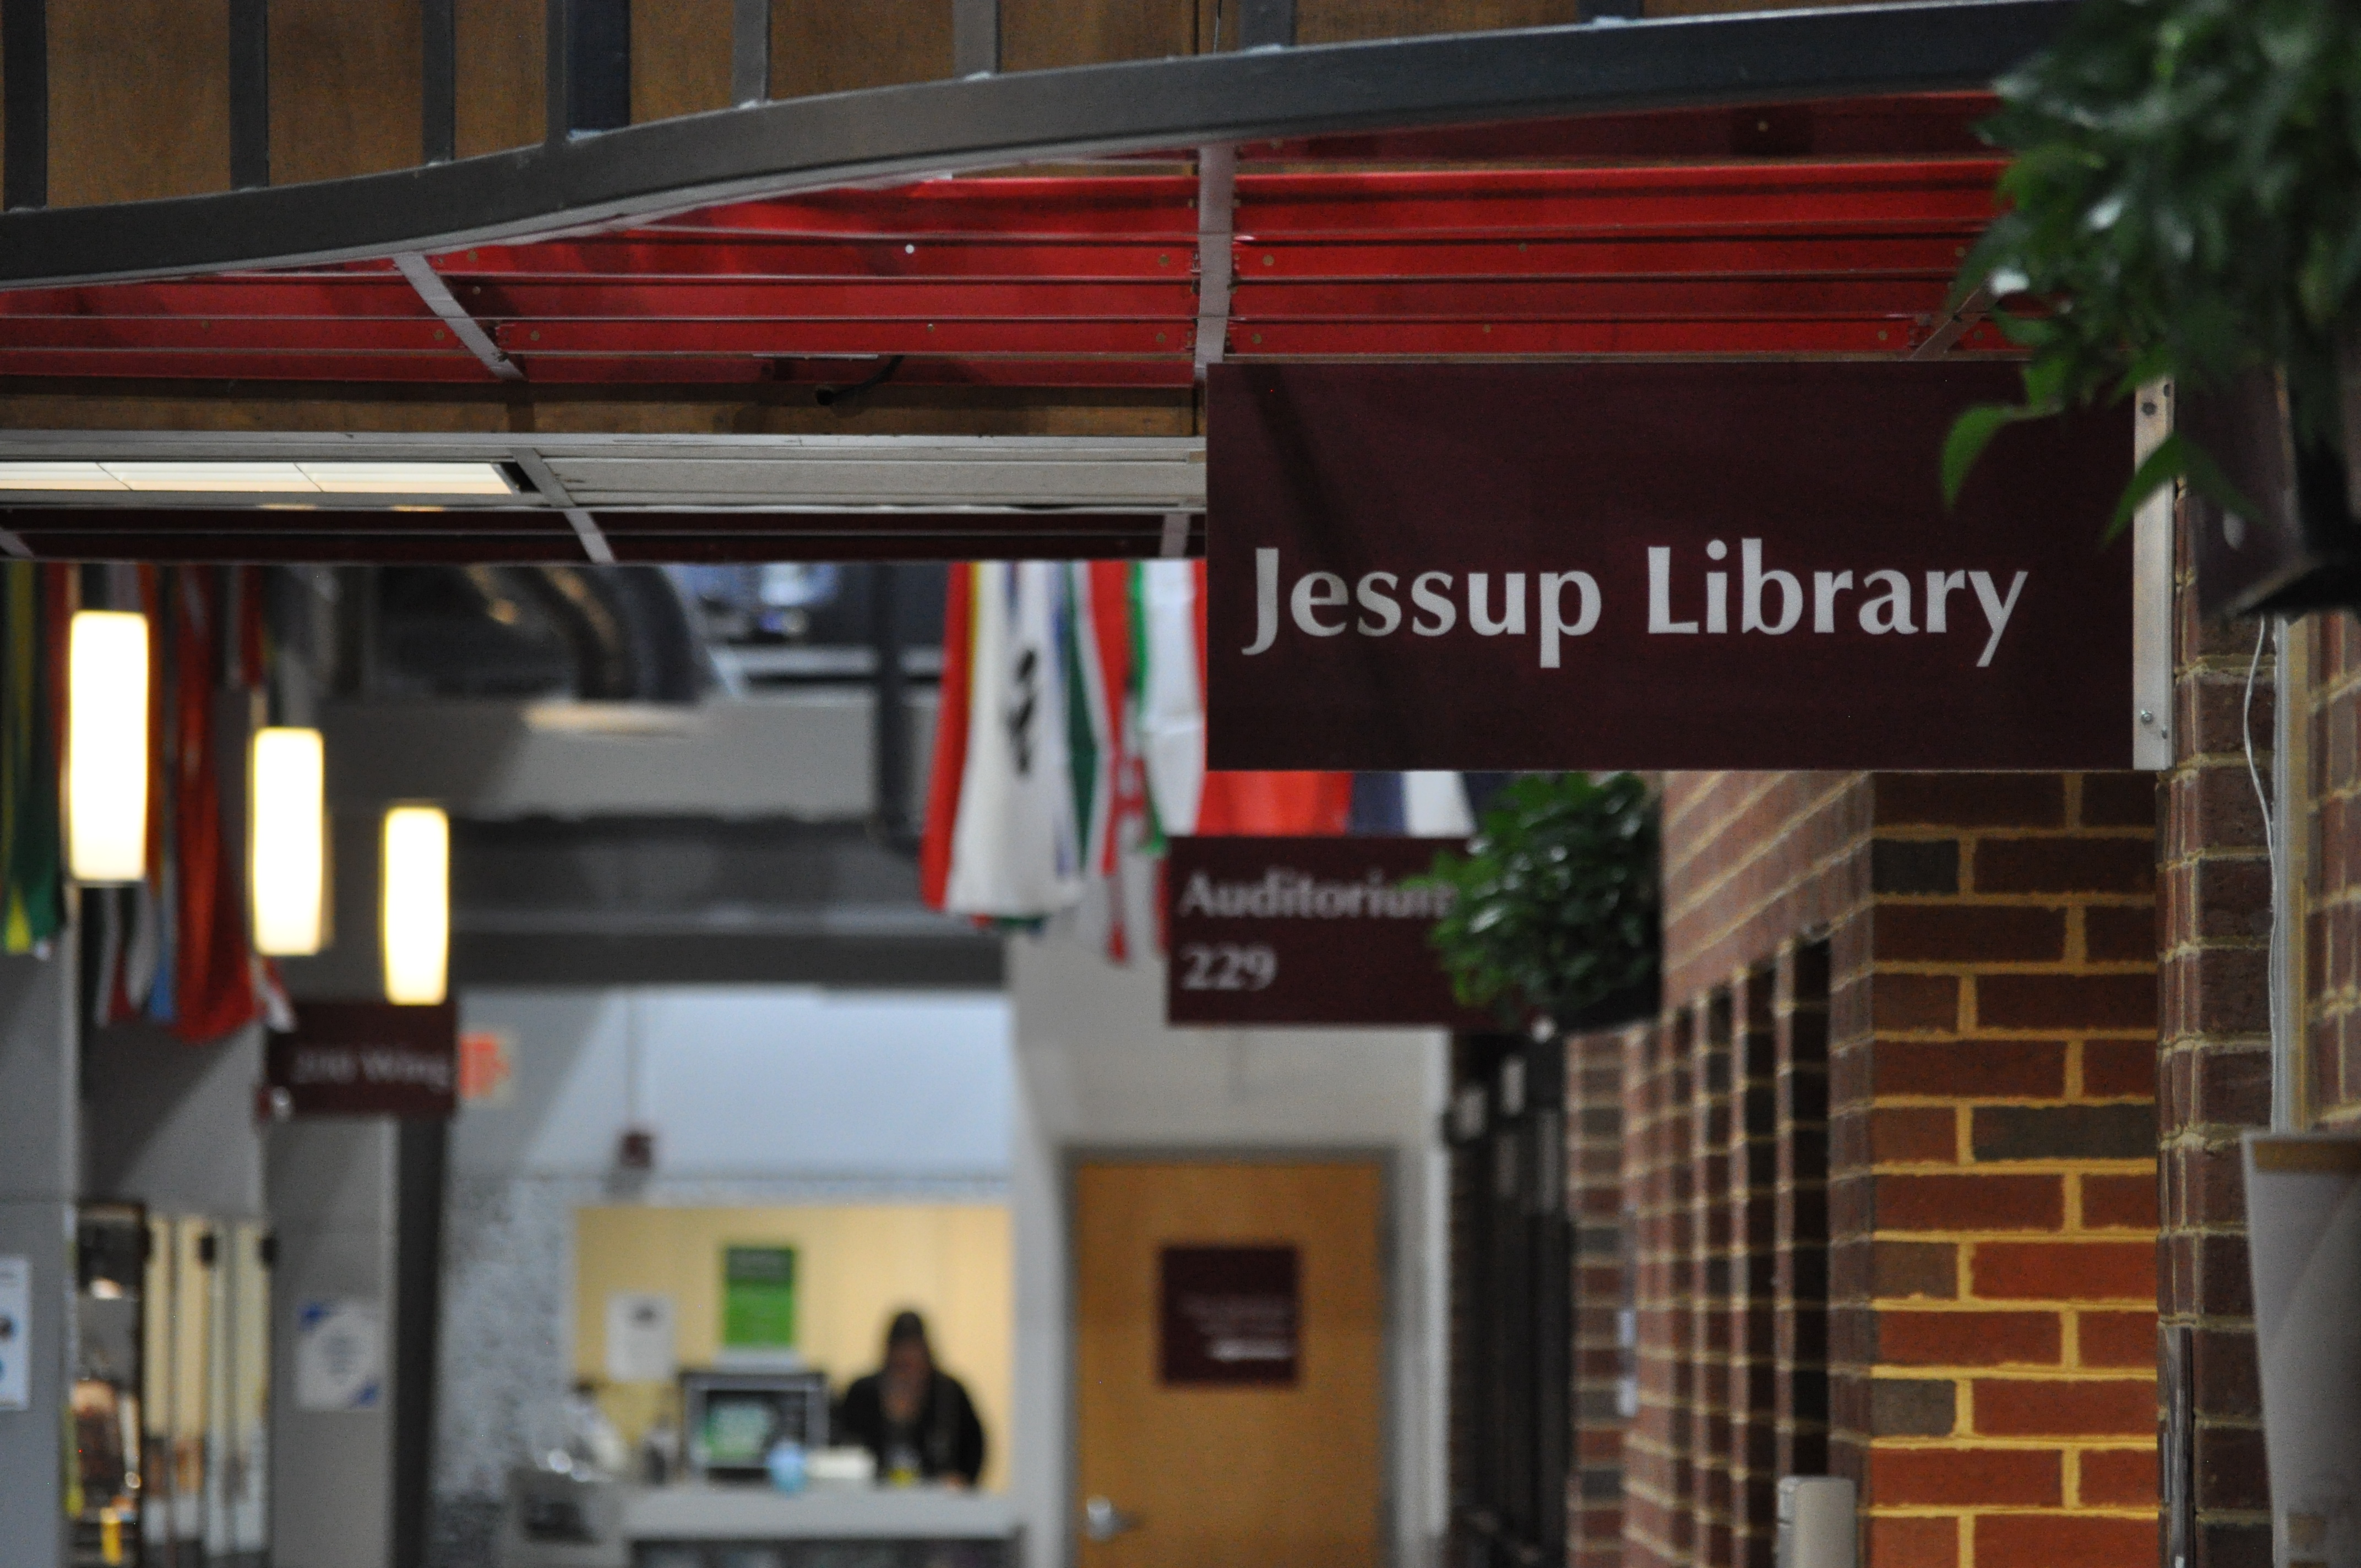 A photo of the couridor outside the PVCC library and the Jessup Library sign.